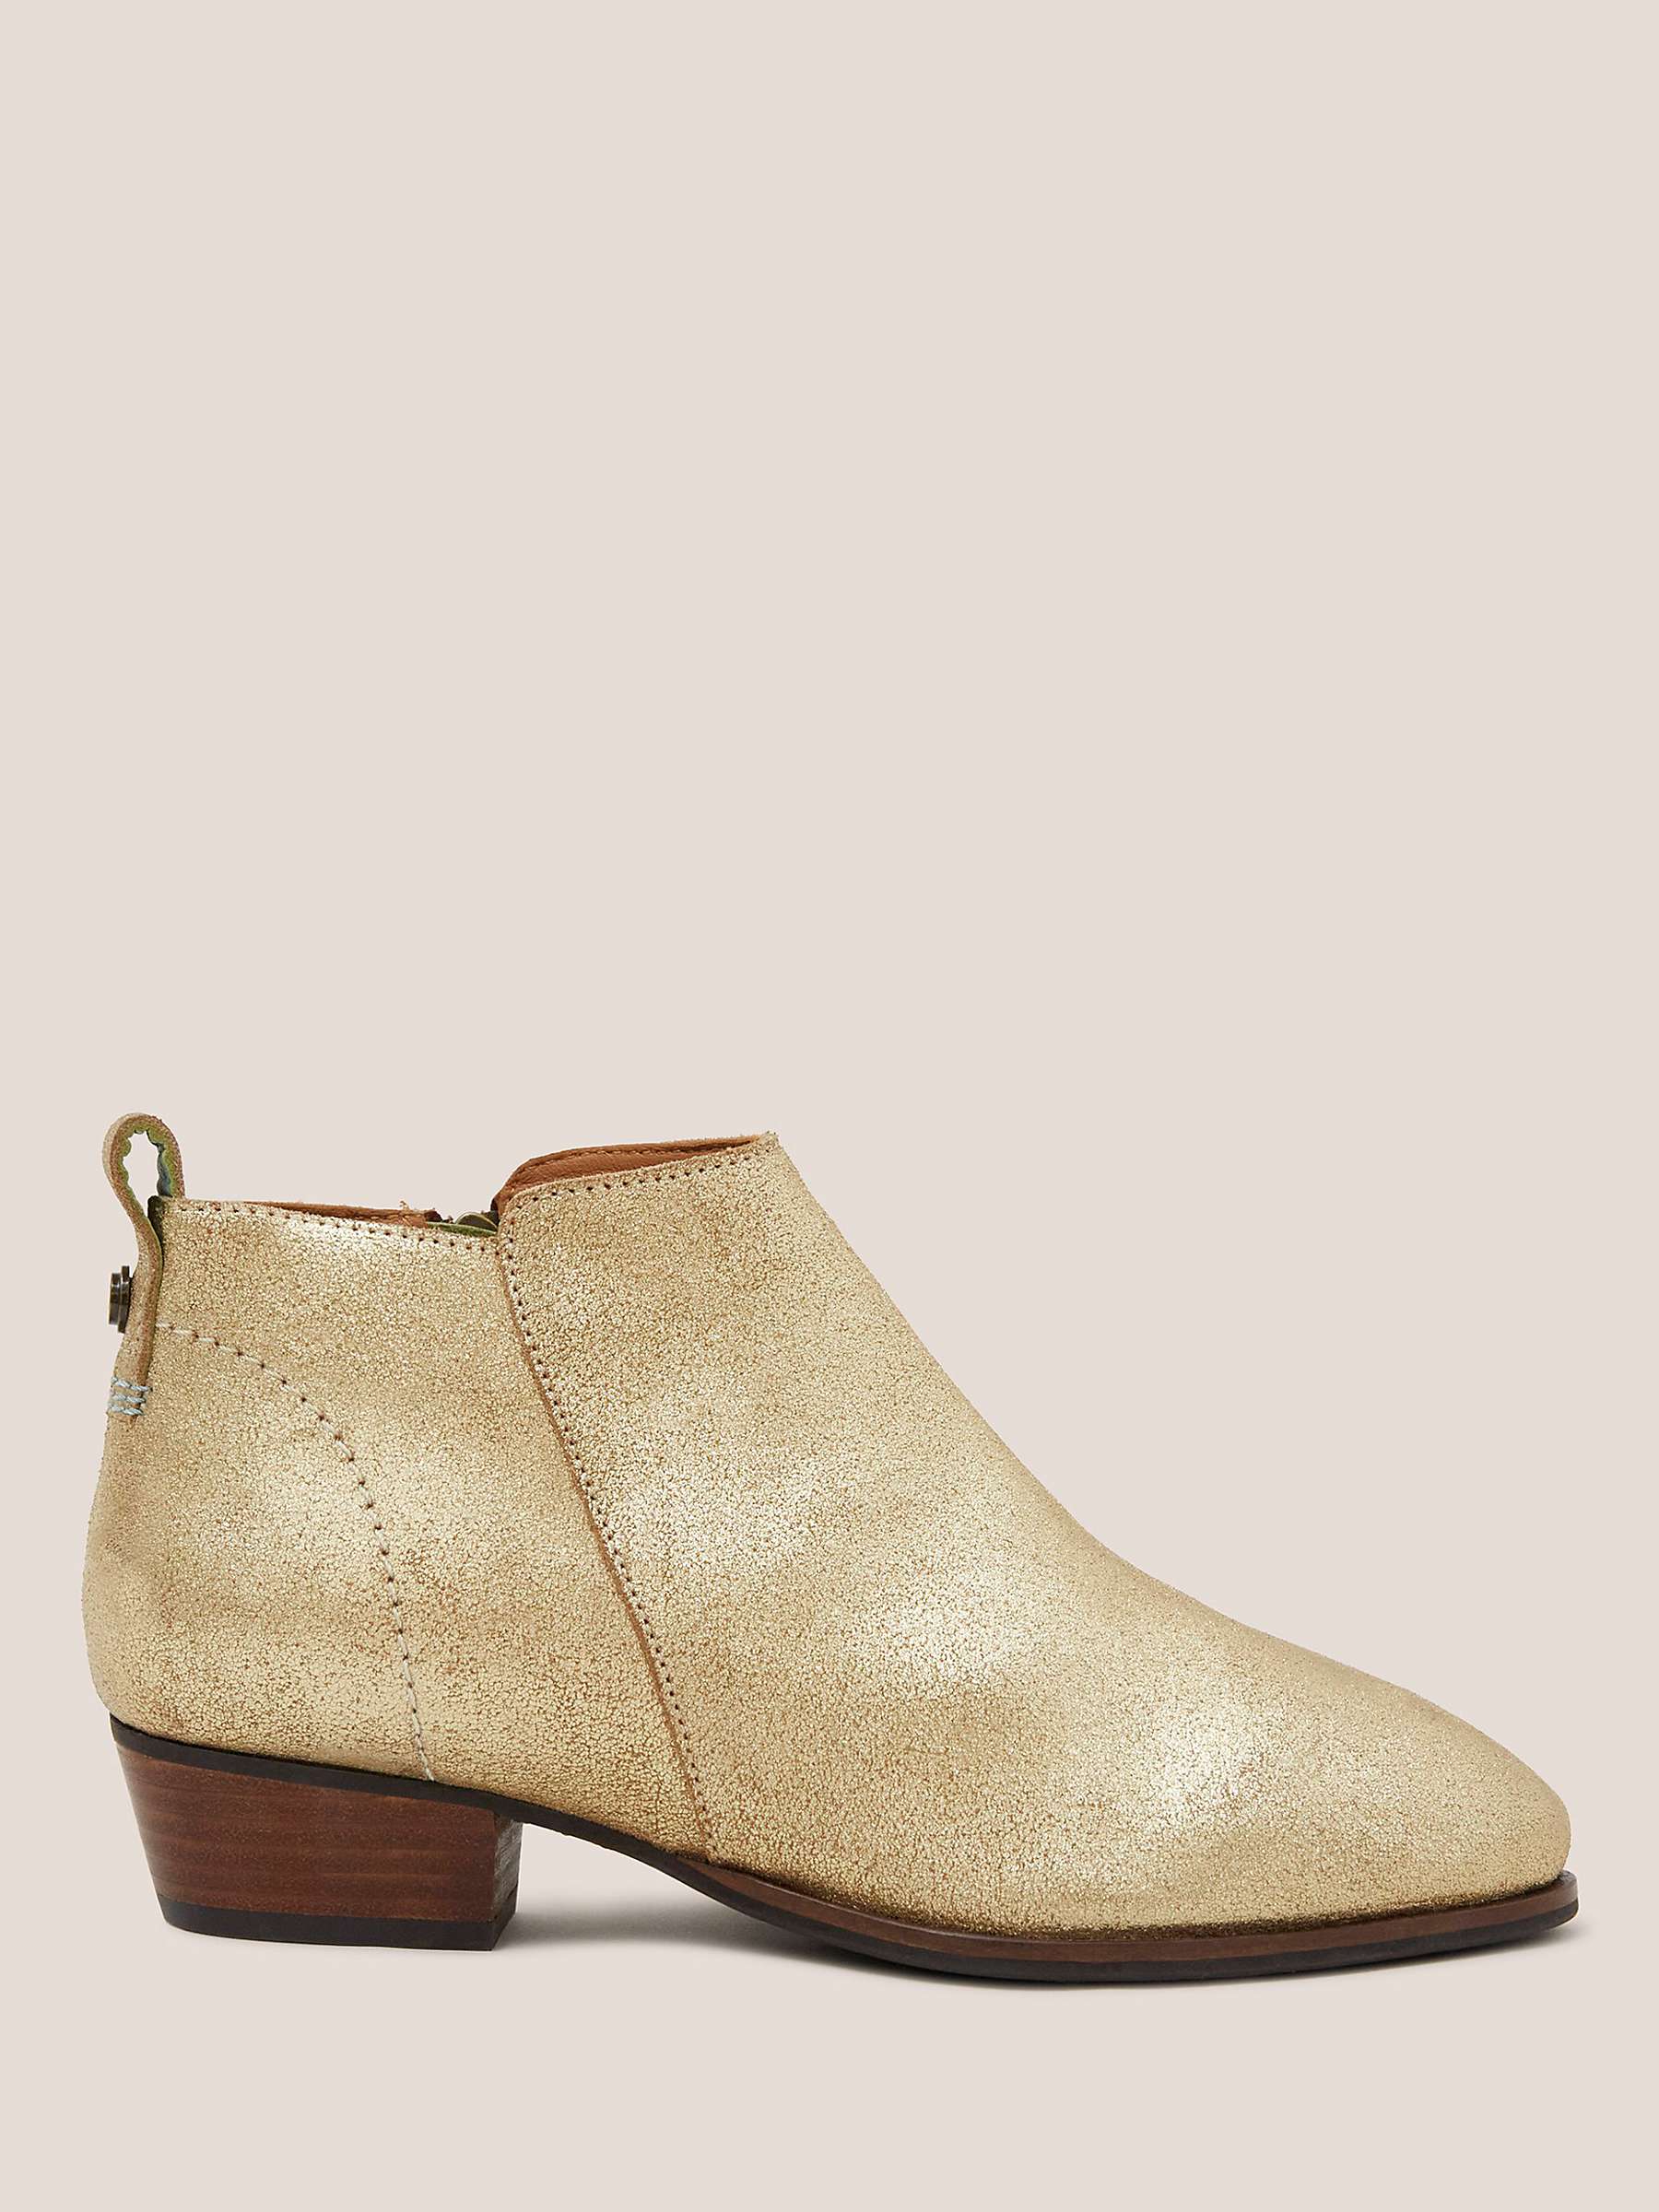 Buy White Stuff Willow Leather Shoe Boots, Gold Online at johnlewis.com